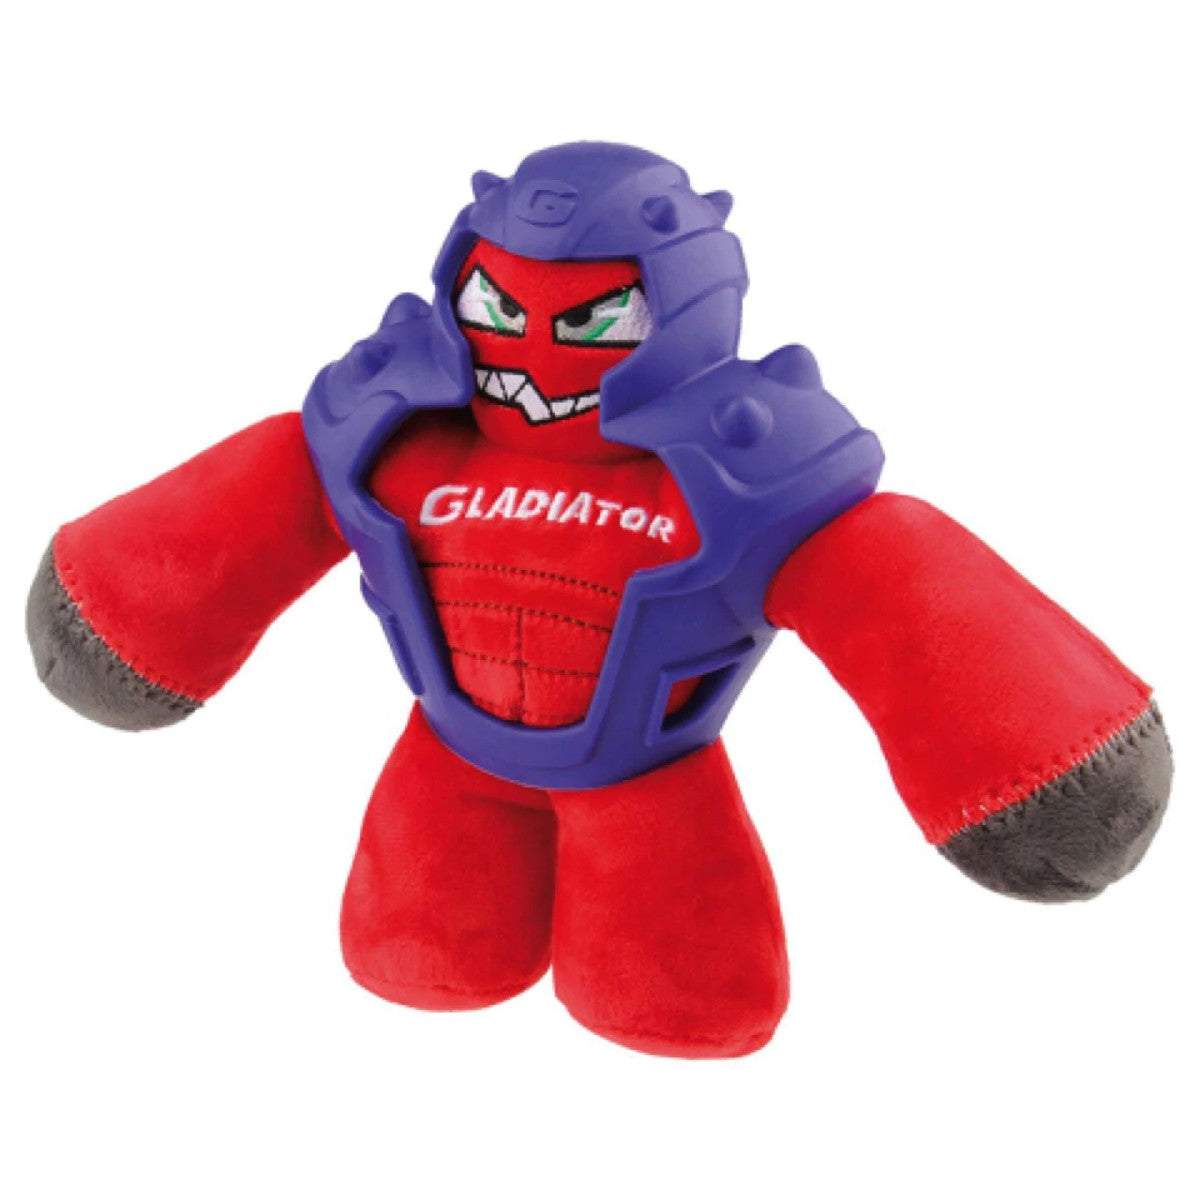 GiGwi Gladiator Plush Red Dog Toy with purple non-toxic rubber body armour.